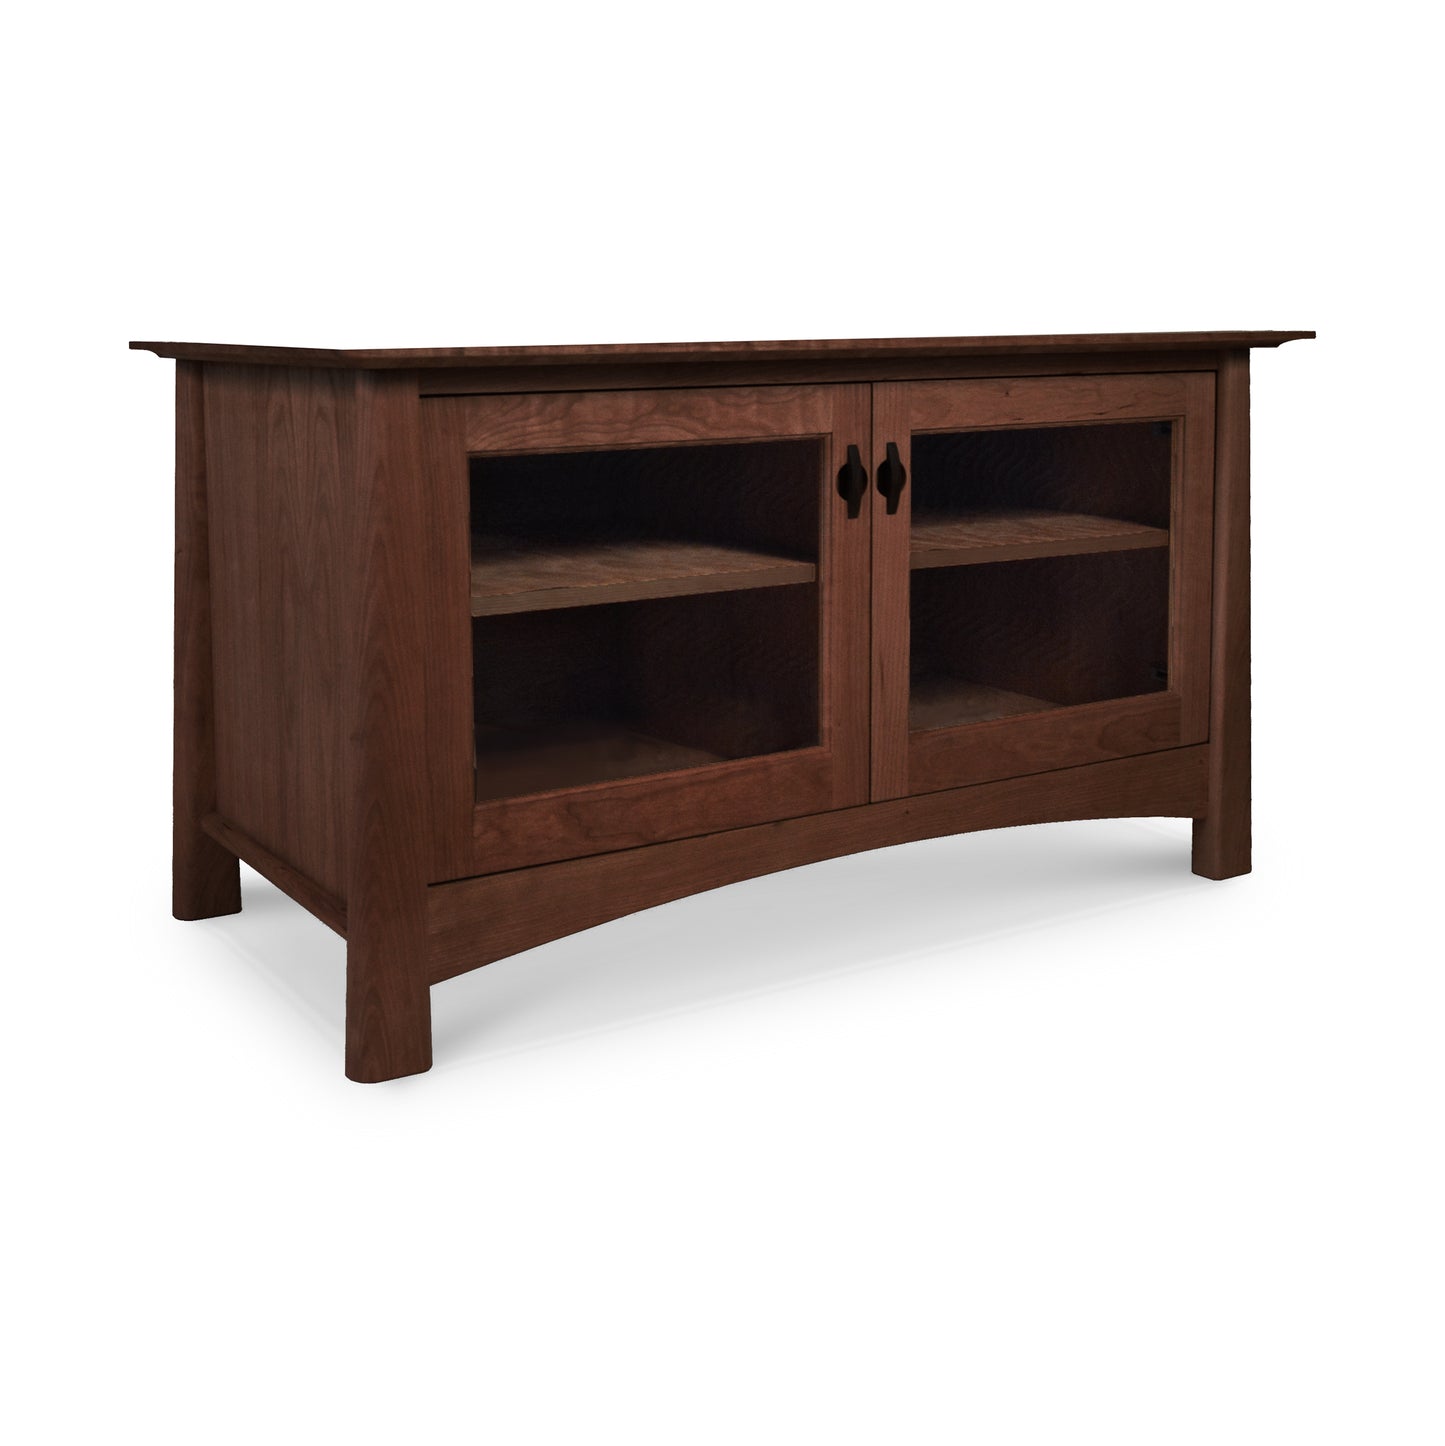 A Maple Corner Woodworks Cherry Moon 49" TV-Media Console with a dark stain, featuring two glass-paneled doors revealing inner shelves, set against a white background.